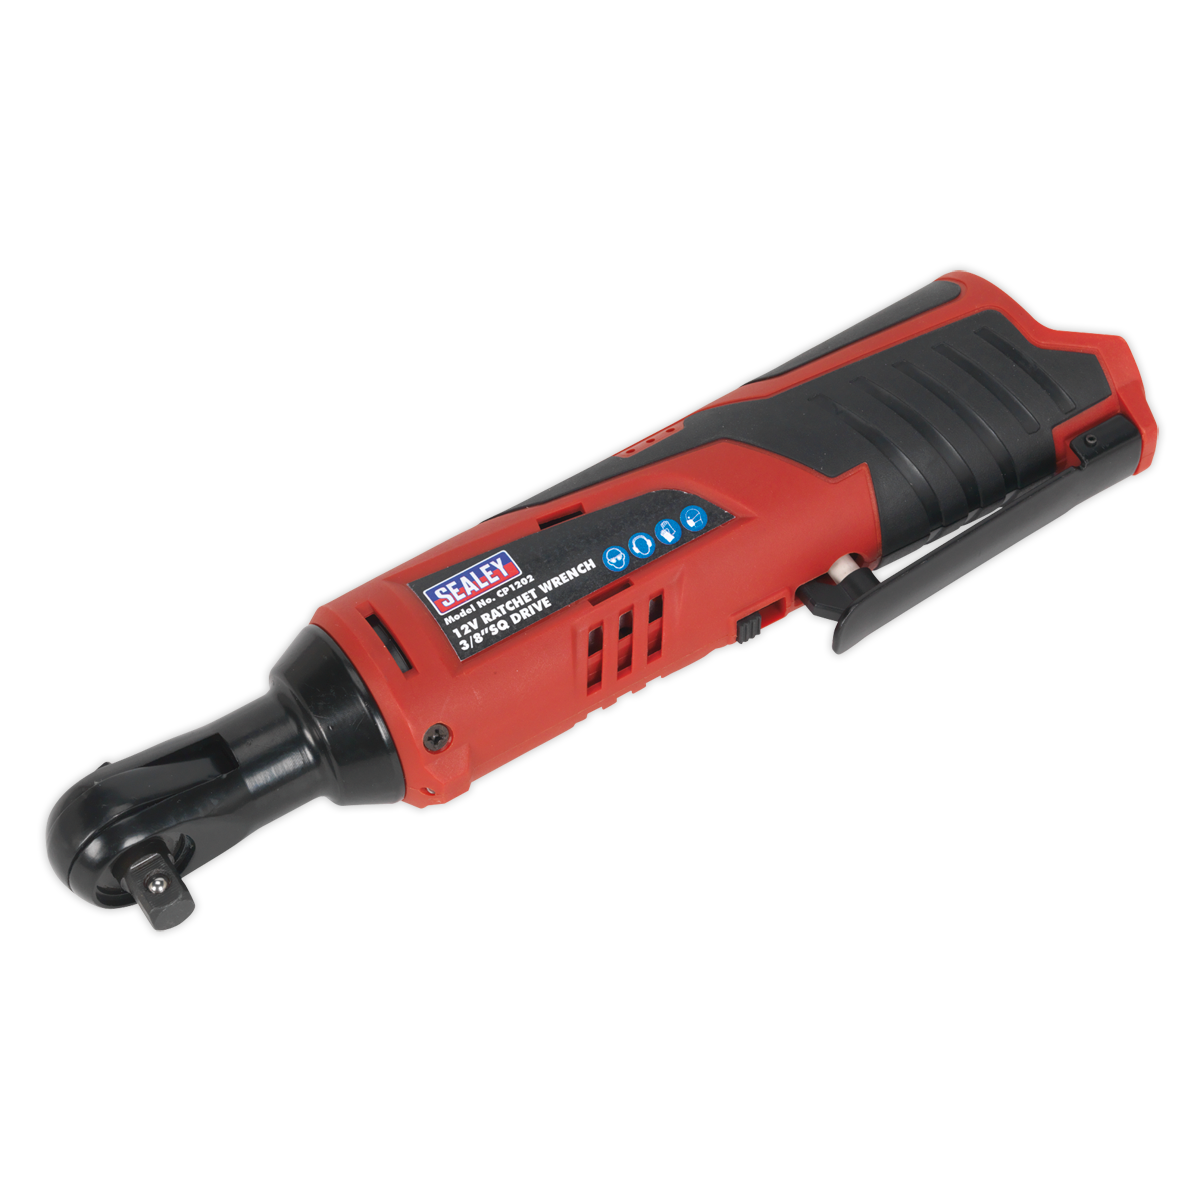 Sealey CP1202 Cordless Ratchet Wrench 3/8"Sq Drive 12V Li-ion - Body Only